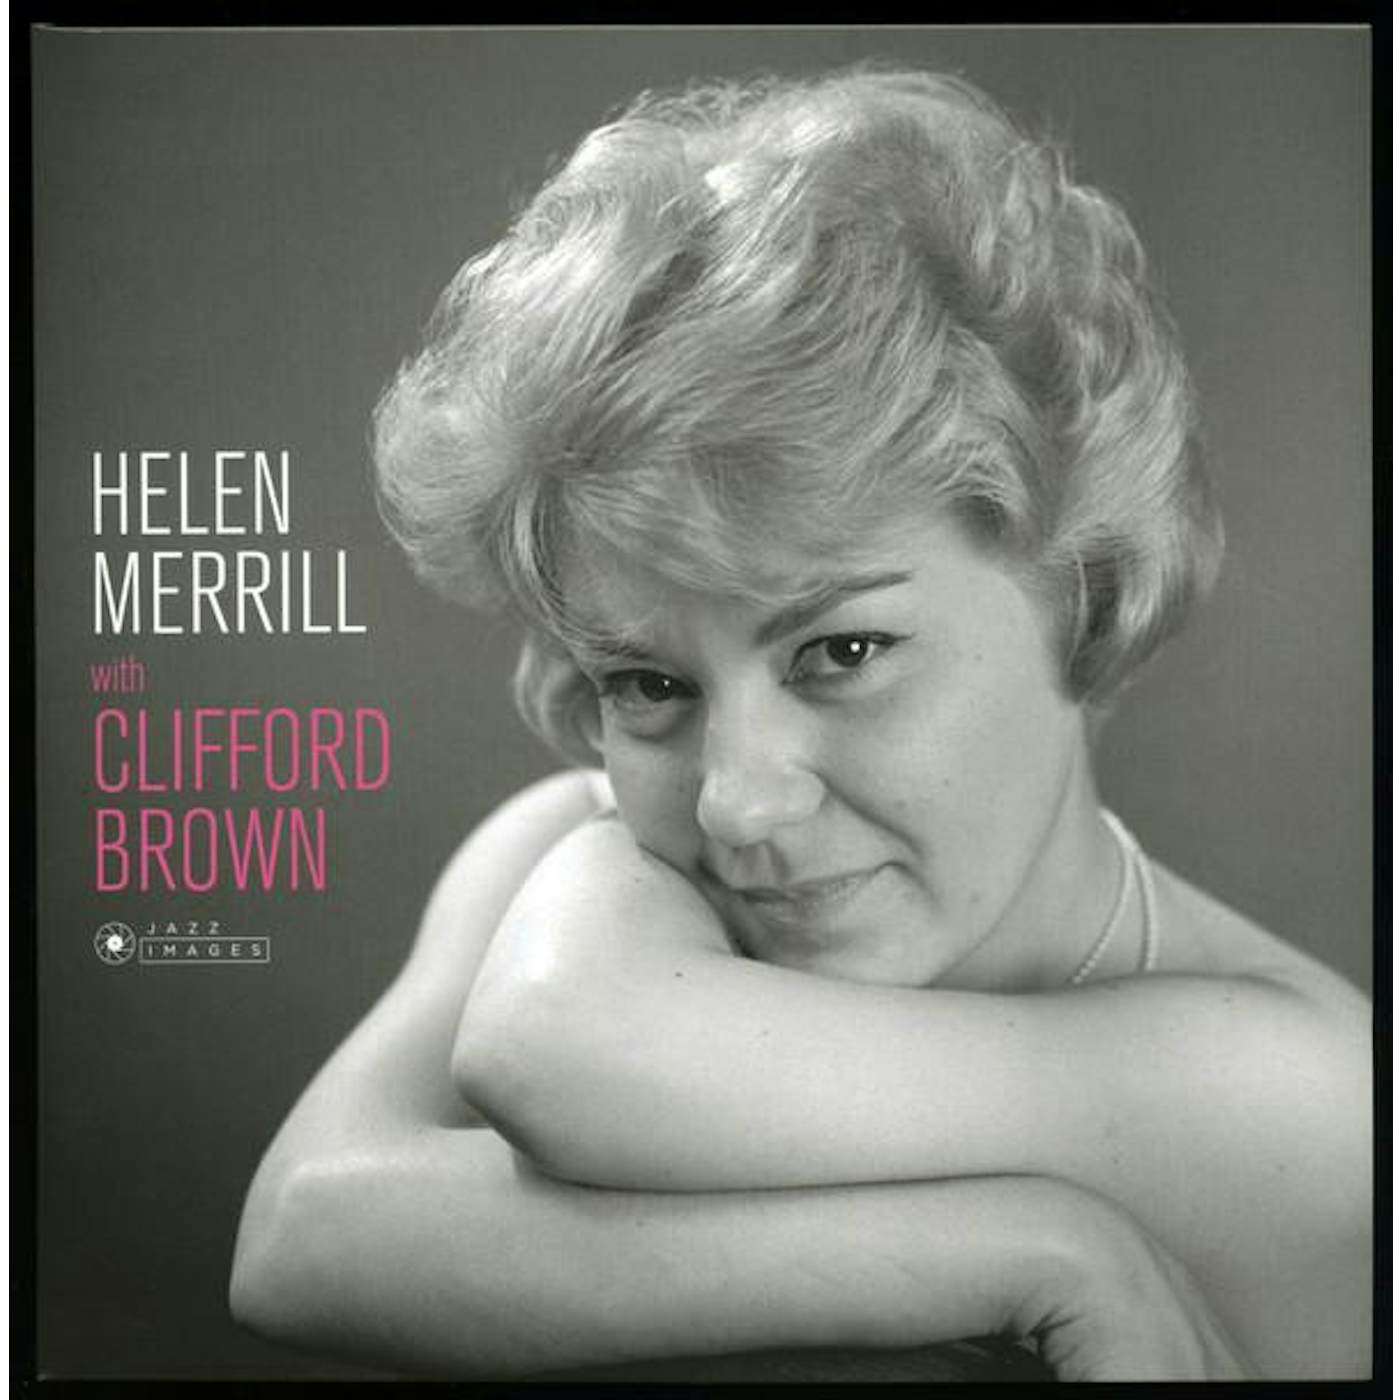 HELEN MERRILL WITH CLIFFORD BROWN (COVER PHOTO BY JEAN-PIERRE LELOIR/GATEFOLD 180G EDITION) Vinyl Record